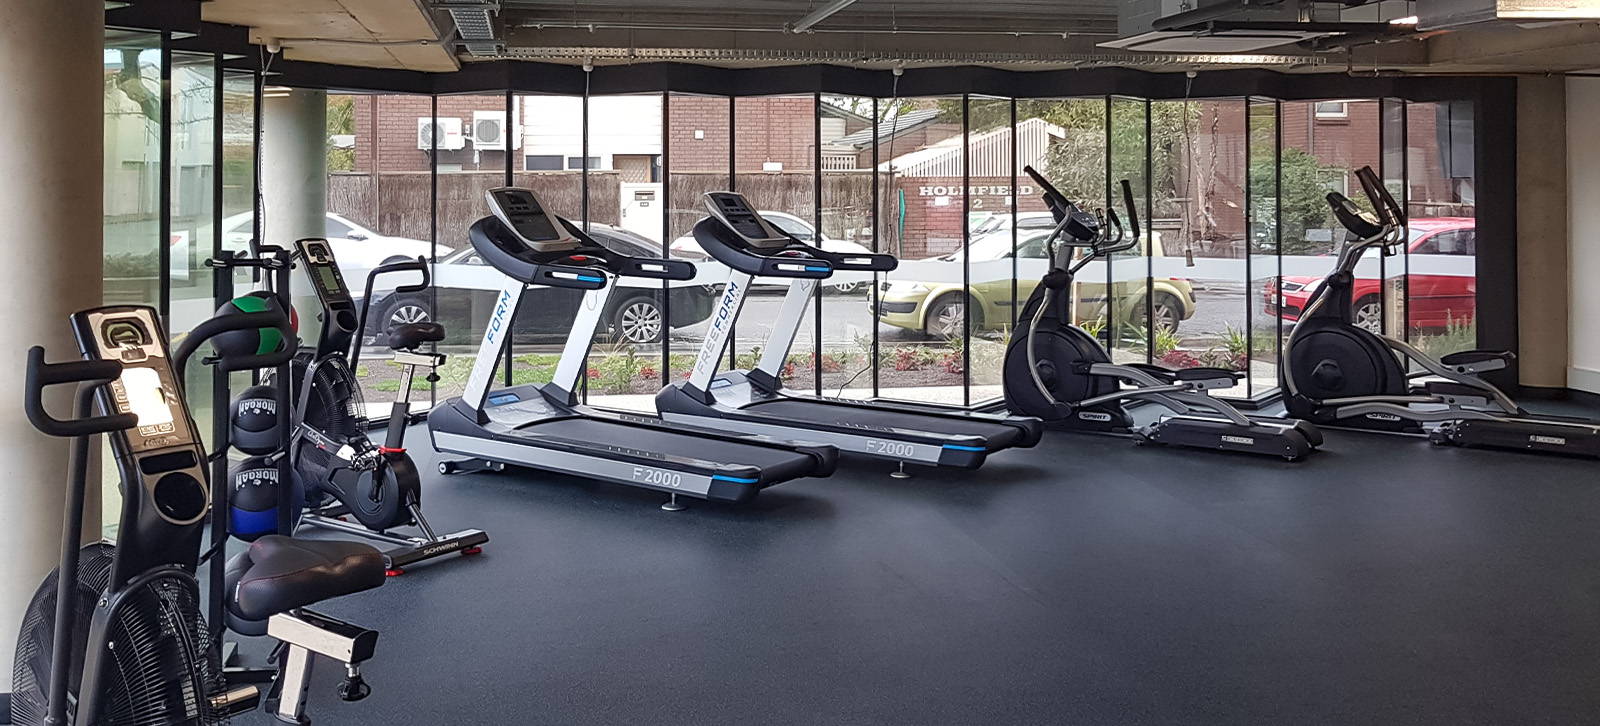 Hospital Gym Equipment Fit Out